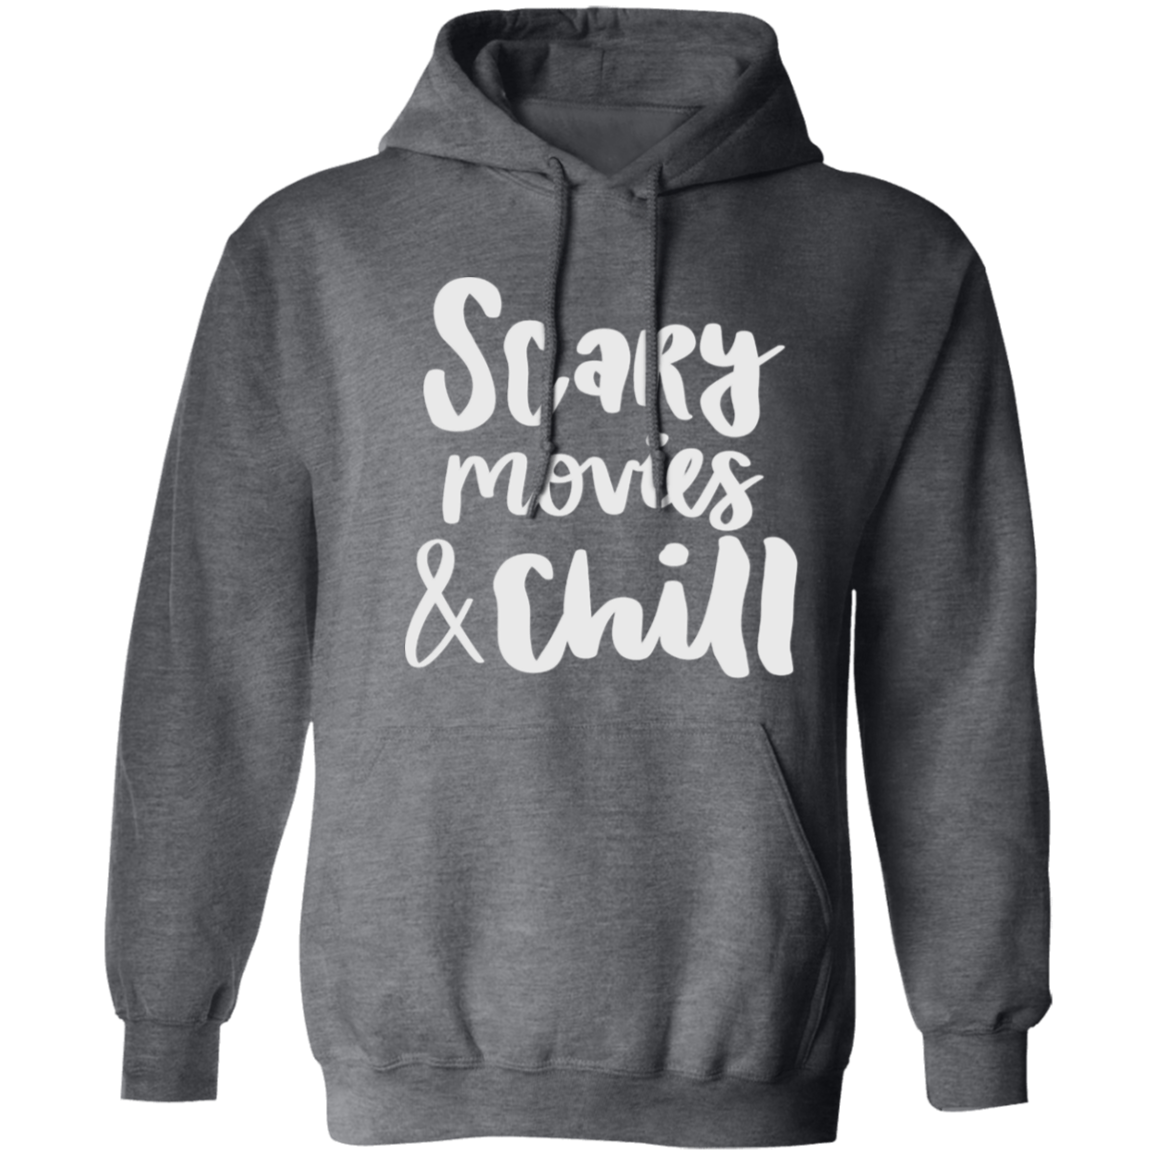 Scary Movies & Chill I HOODIE I Halloween